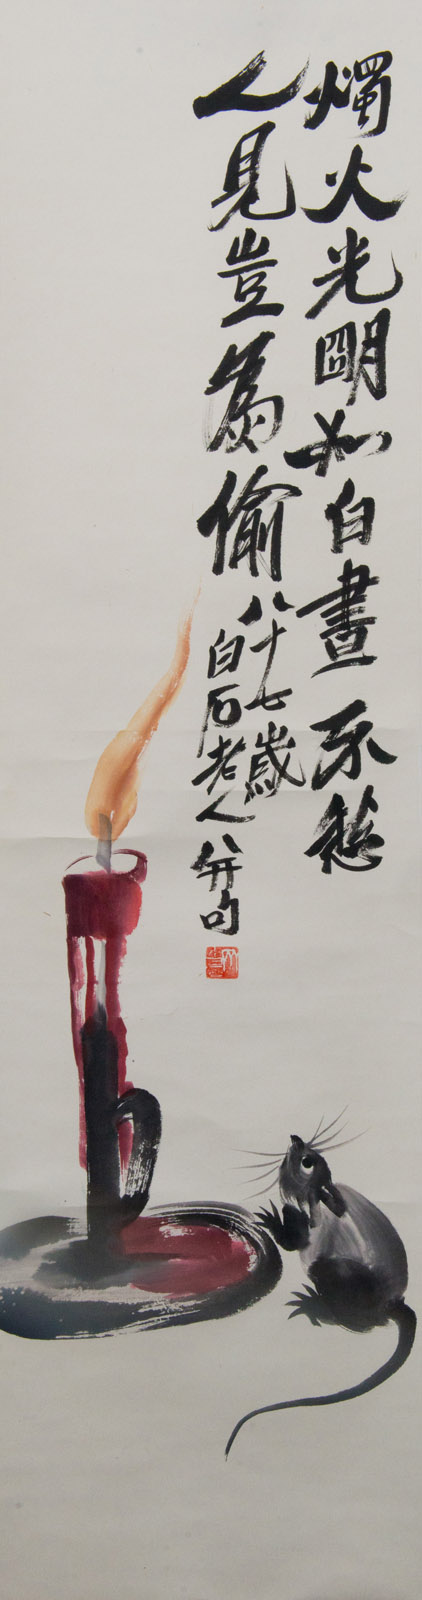 ??? (1863 - 1957) ??? Qi Baishi Mouse by the Candle ??? (1863 - 1957) ??? ???????? ??:???????